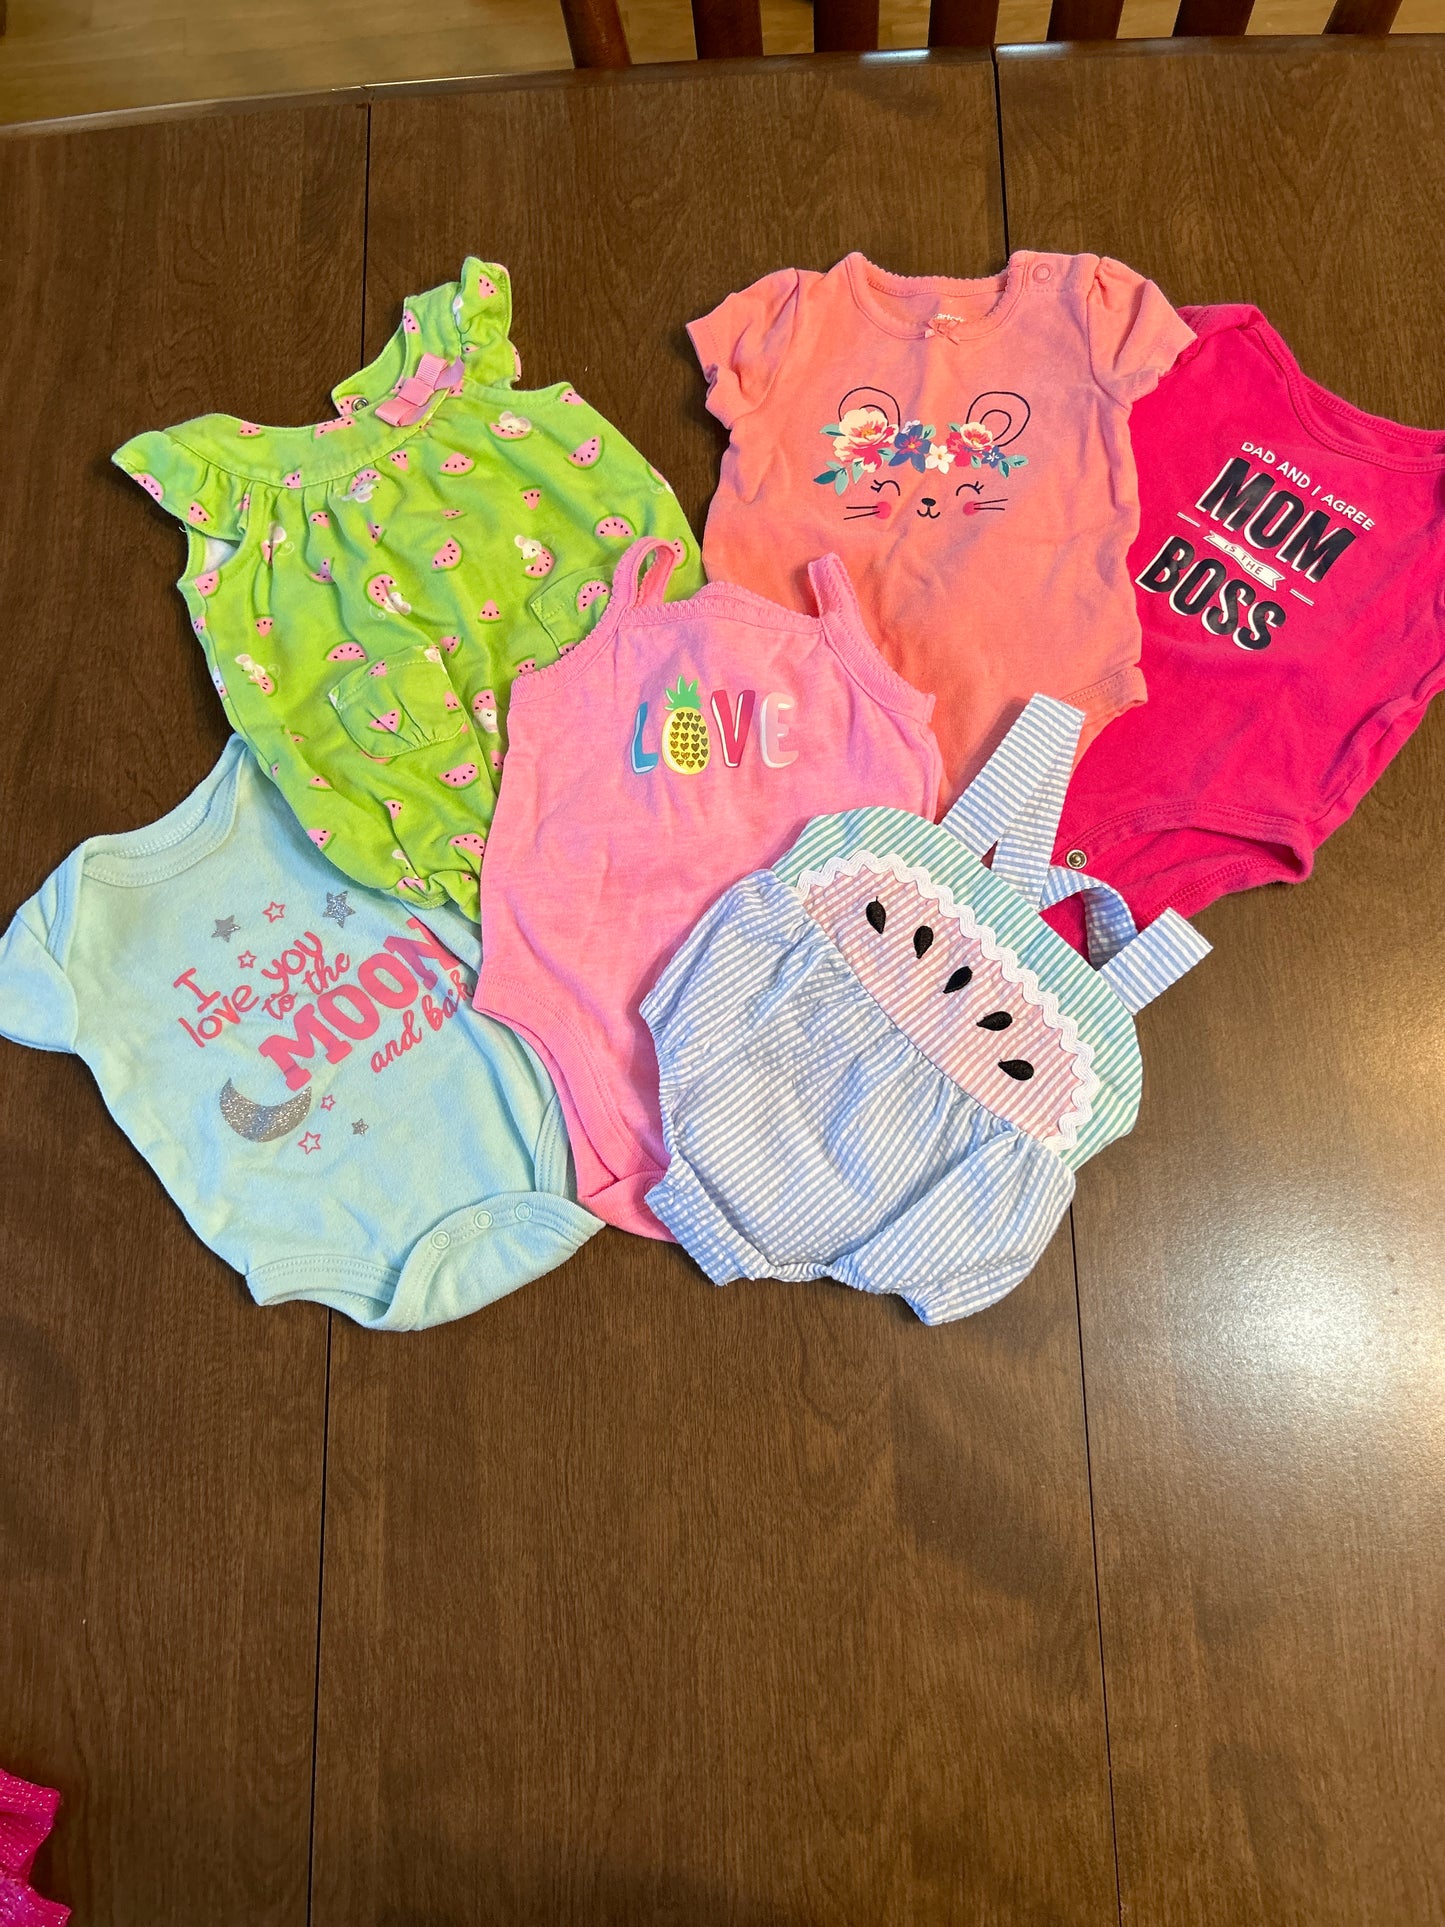 6 girl outfits NB- 3 months